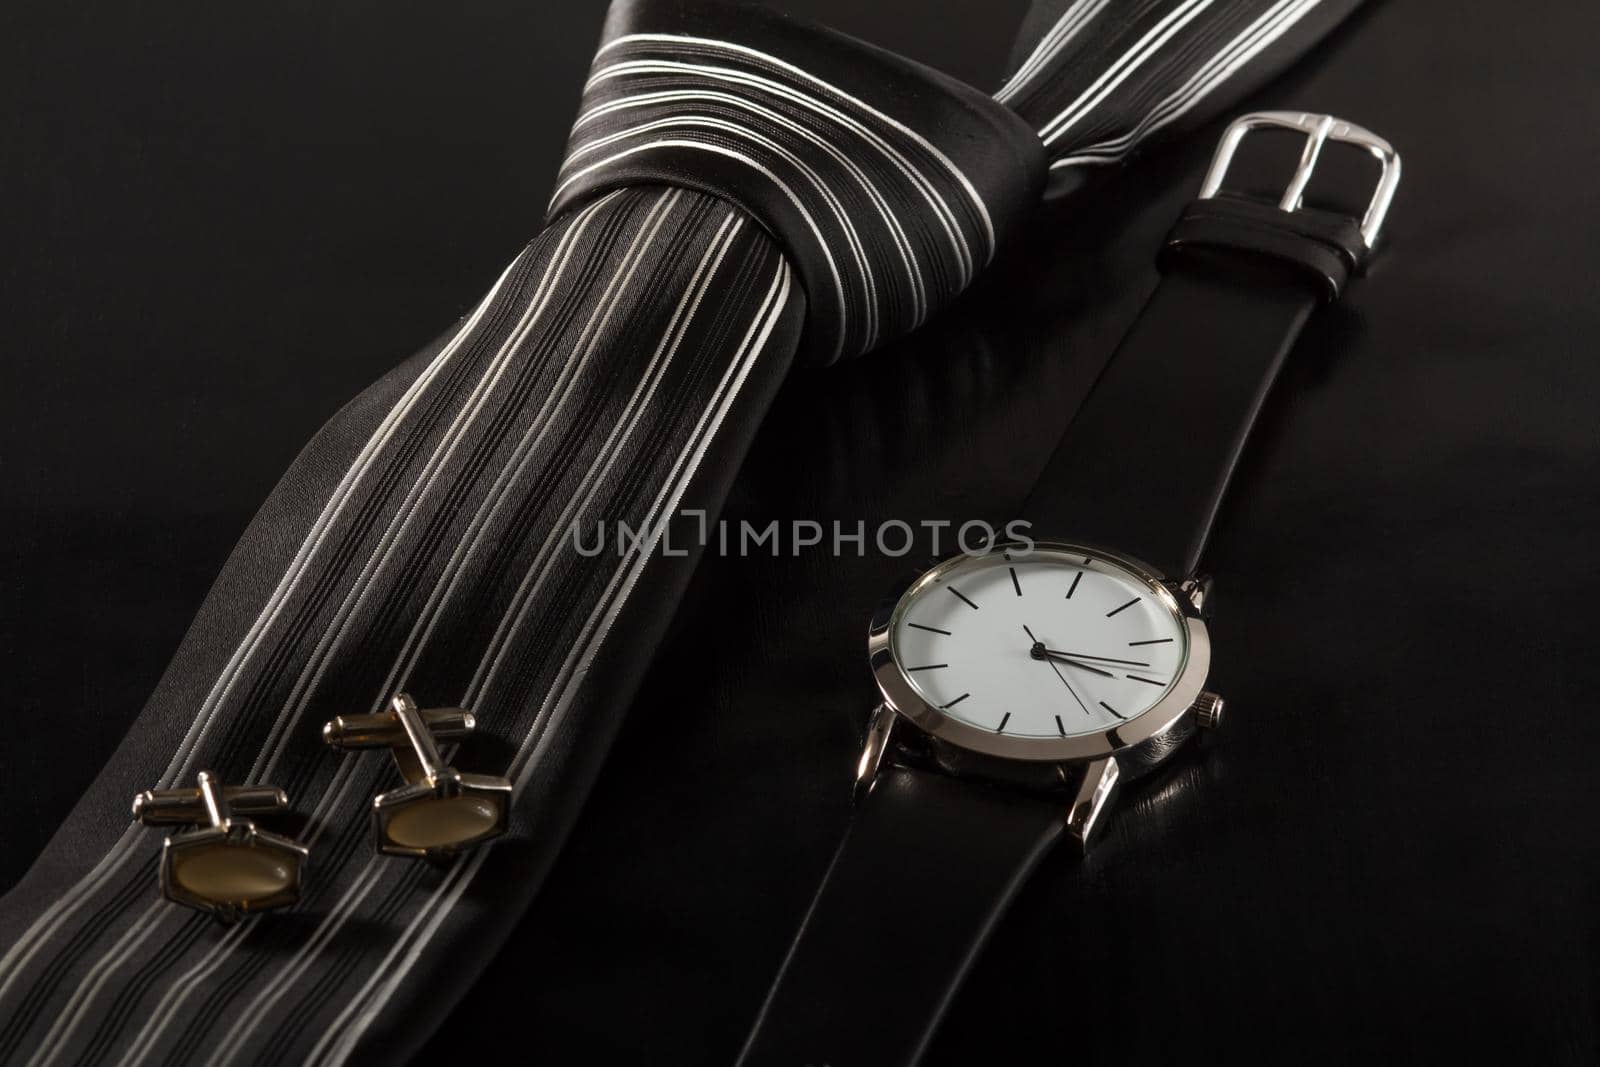 Silk tie, cufflinks, watch with a leather strap on a black background